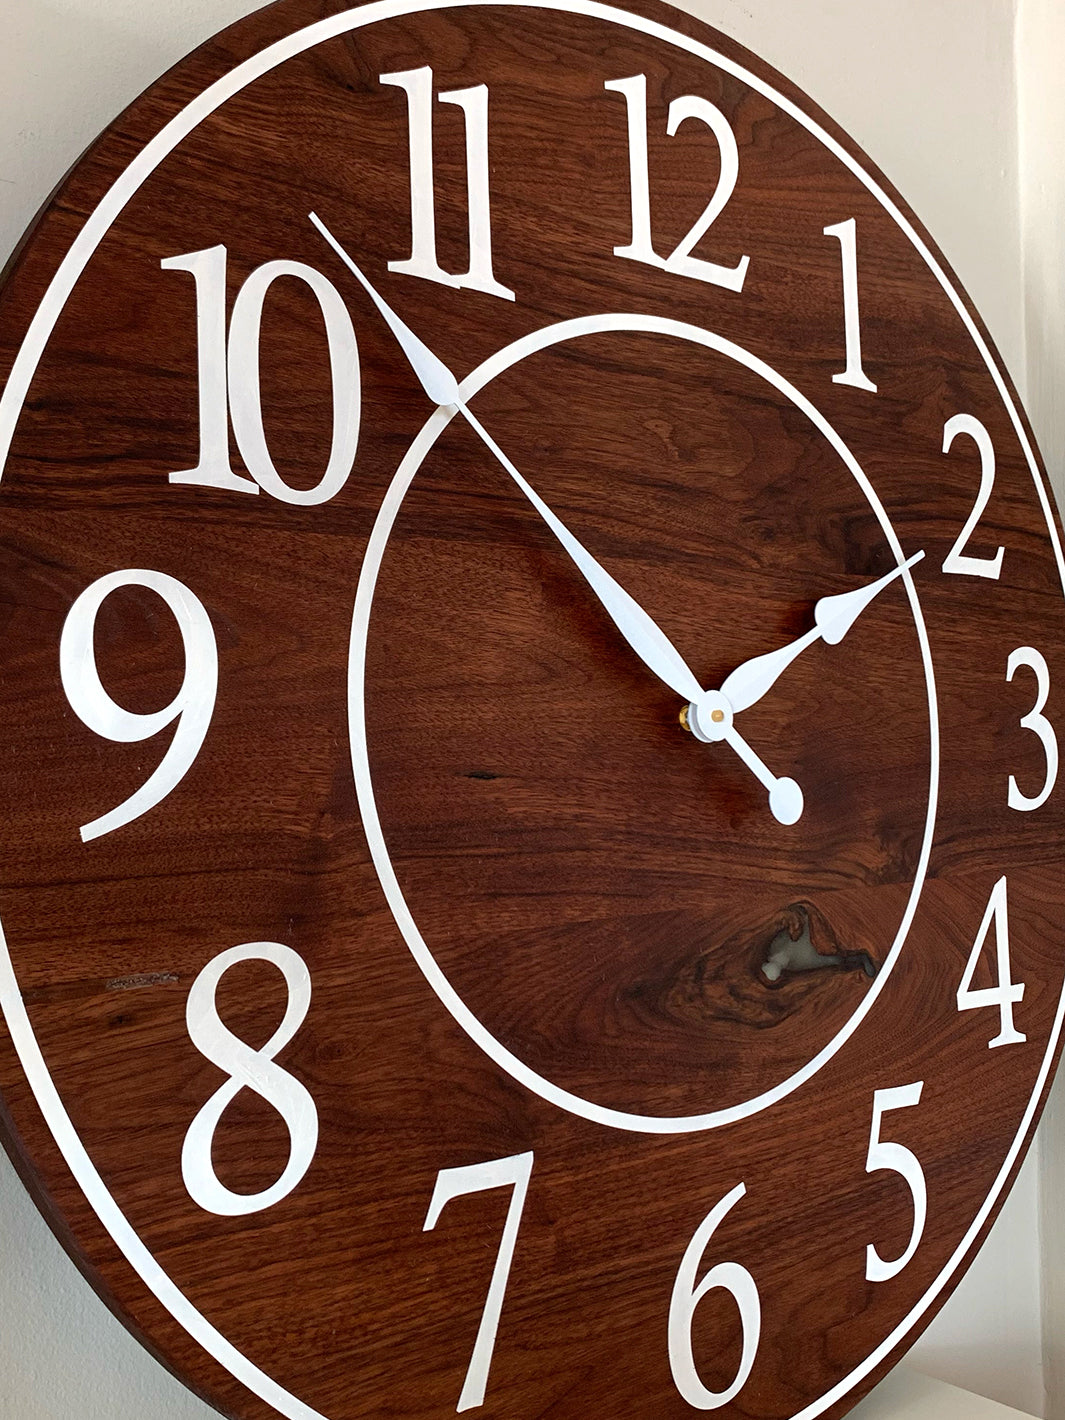 Solid Clear Walnut 30" Wall Clock with White Lines and Numbers (in stock) Earthly Comfort Clocks 2094-4